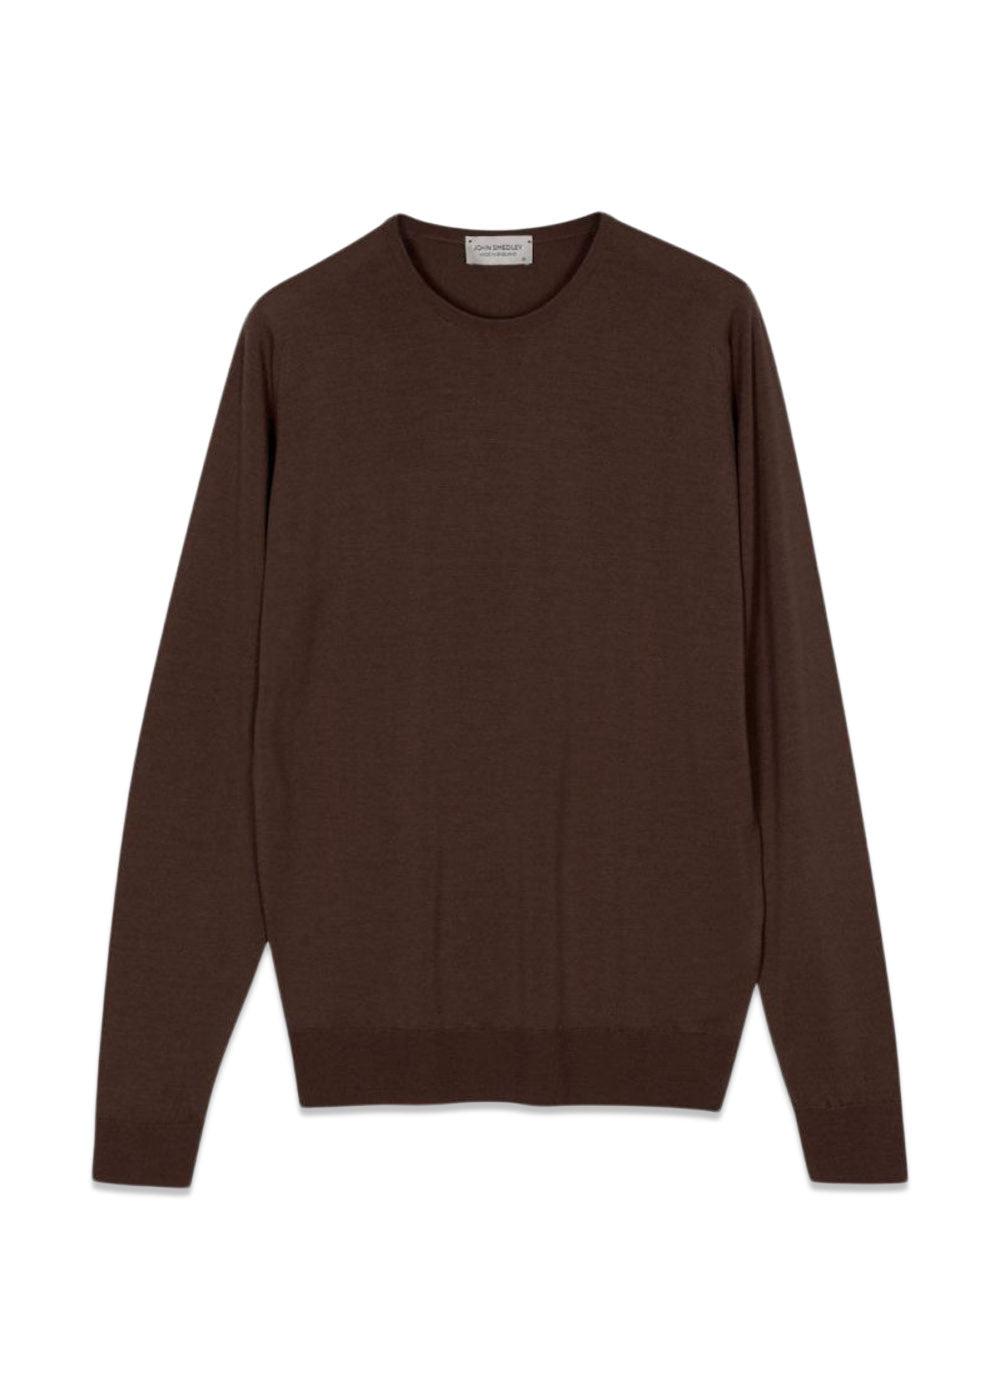 LUNDY PULLOVER CN LS - Truffle